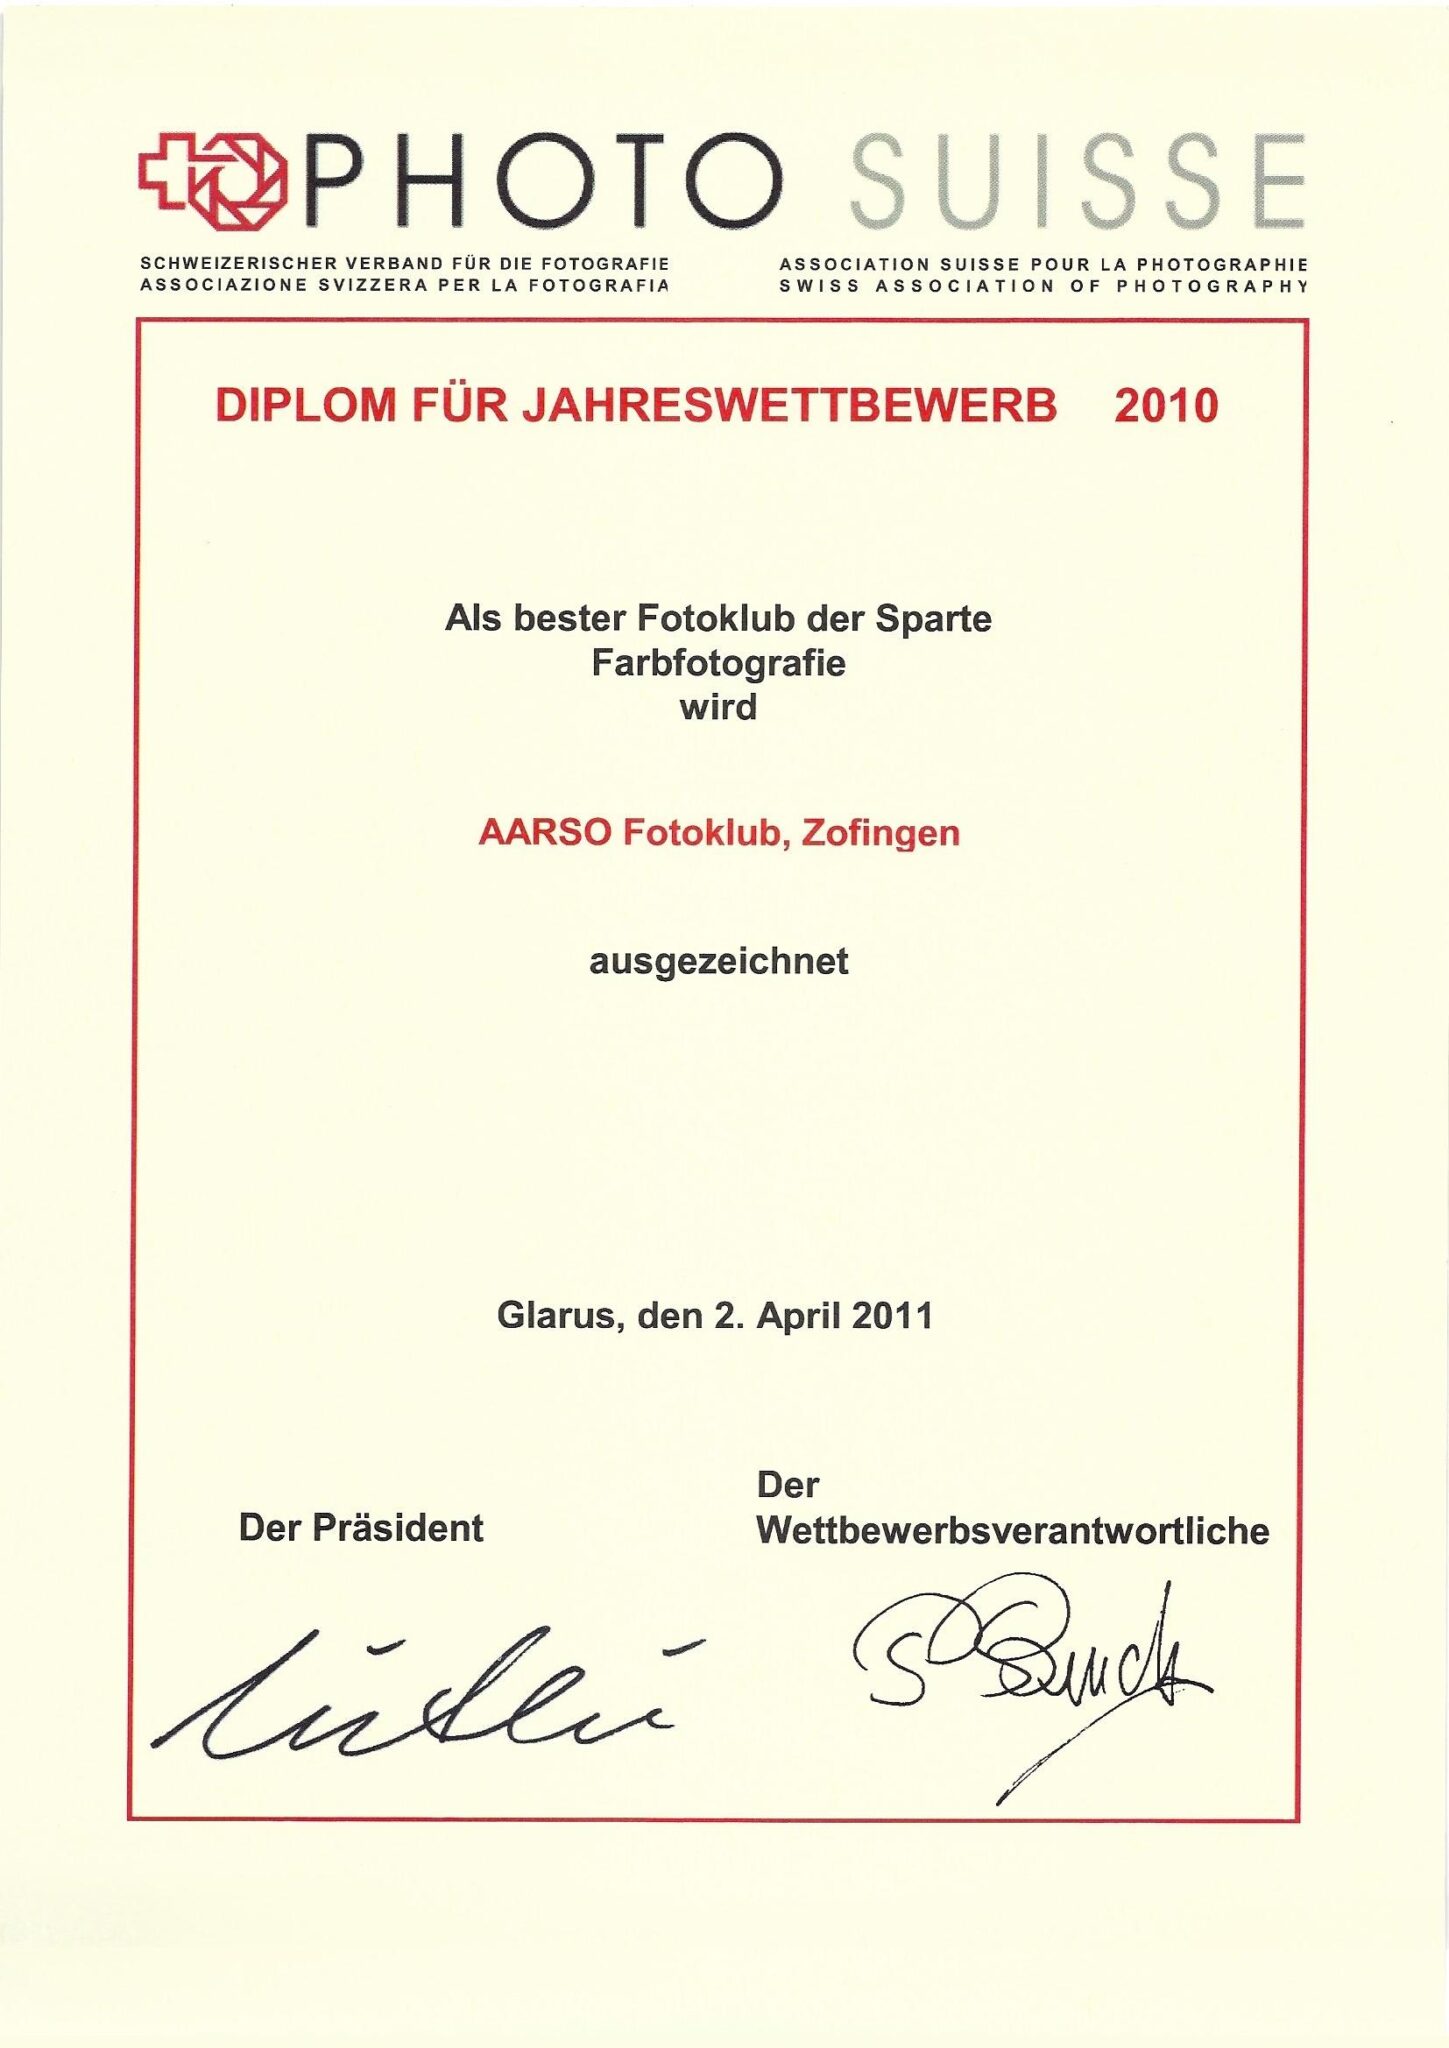 PS Diplom Bester Farb & BW 2010